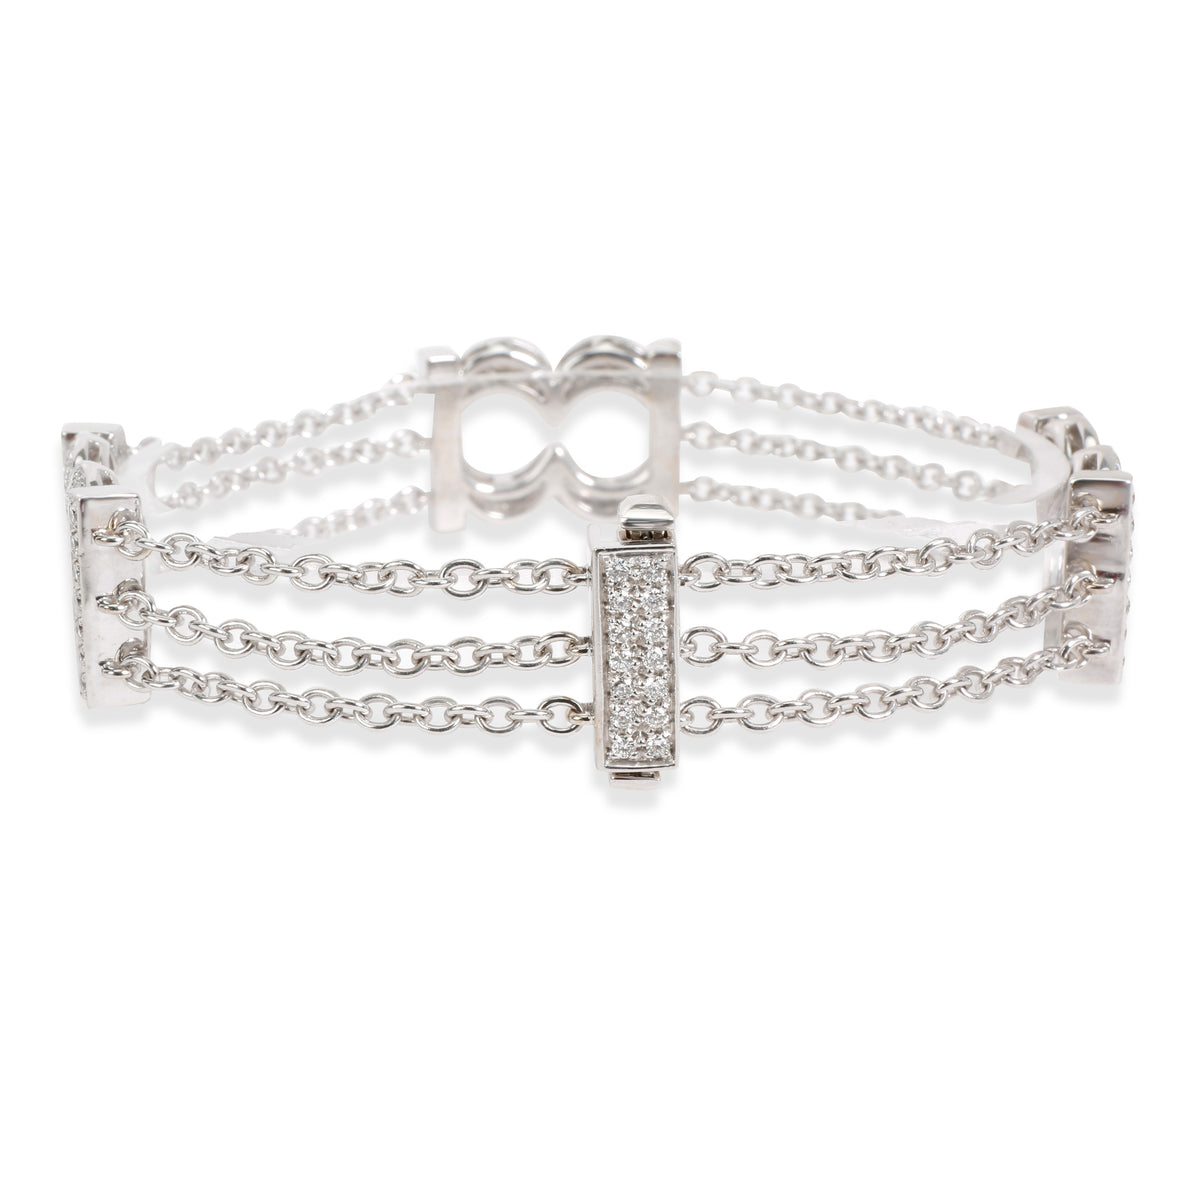 Bedat and Co. Orianne Collins Diamond Bracelet in 18K White Gold 1.5 CTW